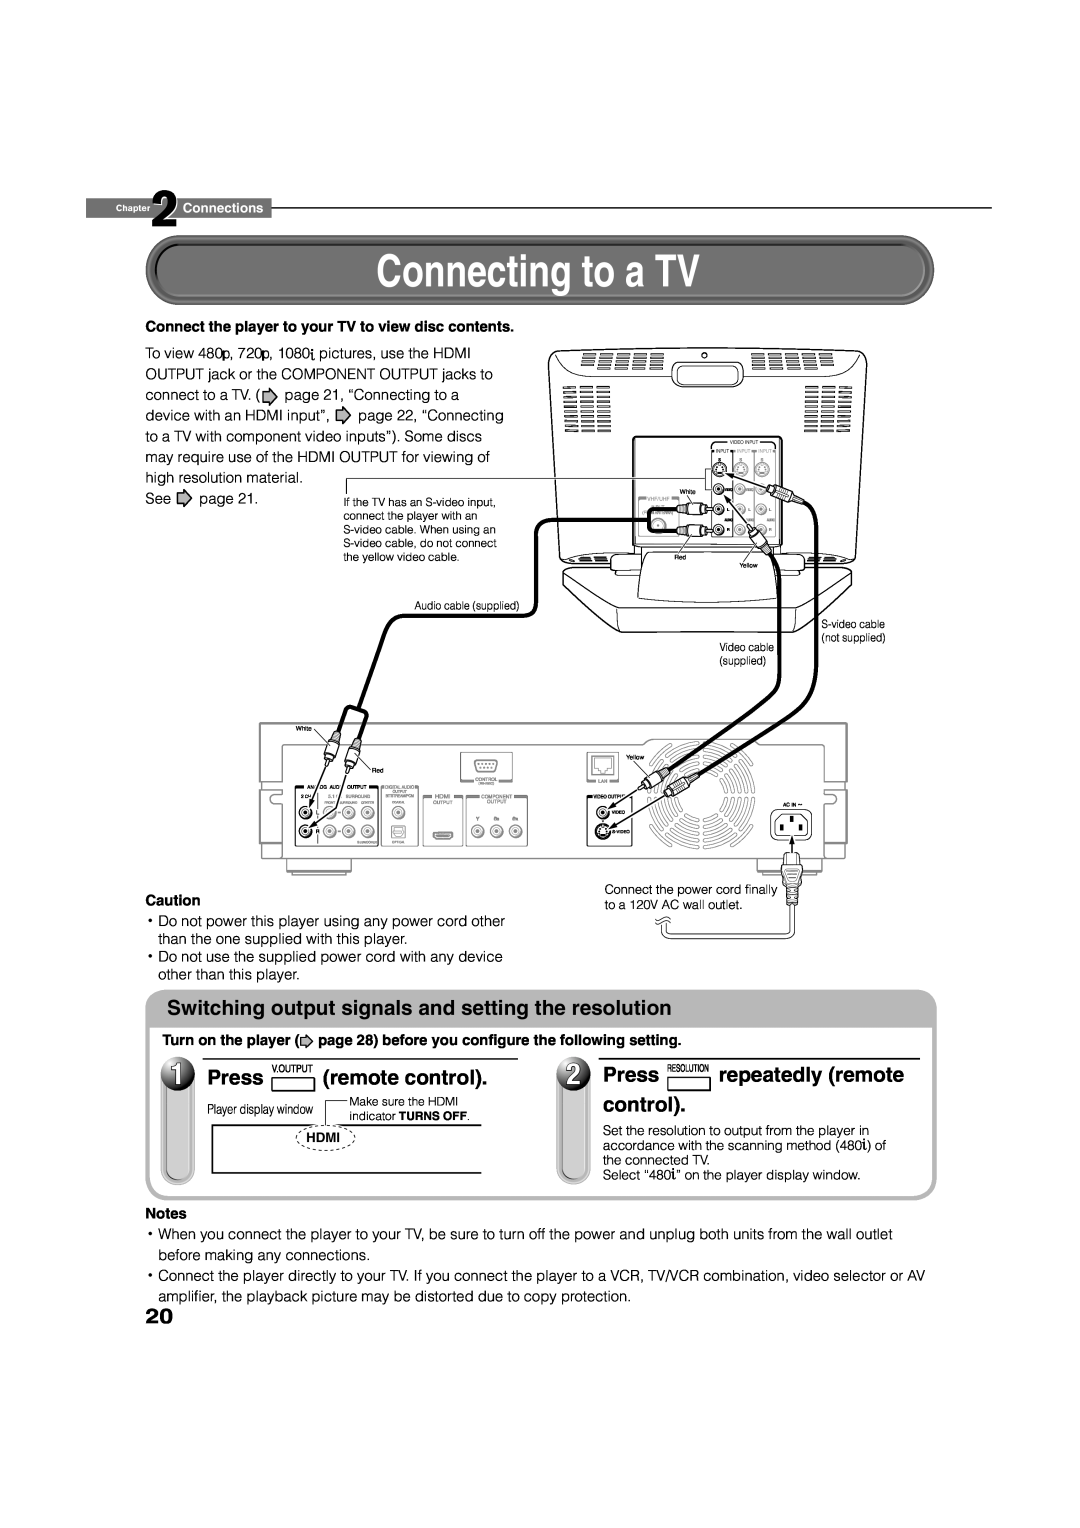 Toshiba HD-D1, HD-A1 Connecting to a TV, Switching output signals and setting the resolution, Press, remote control 